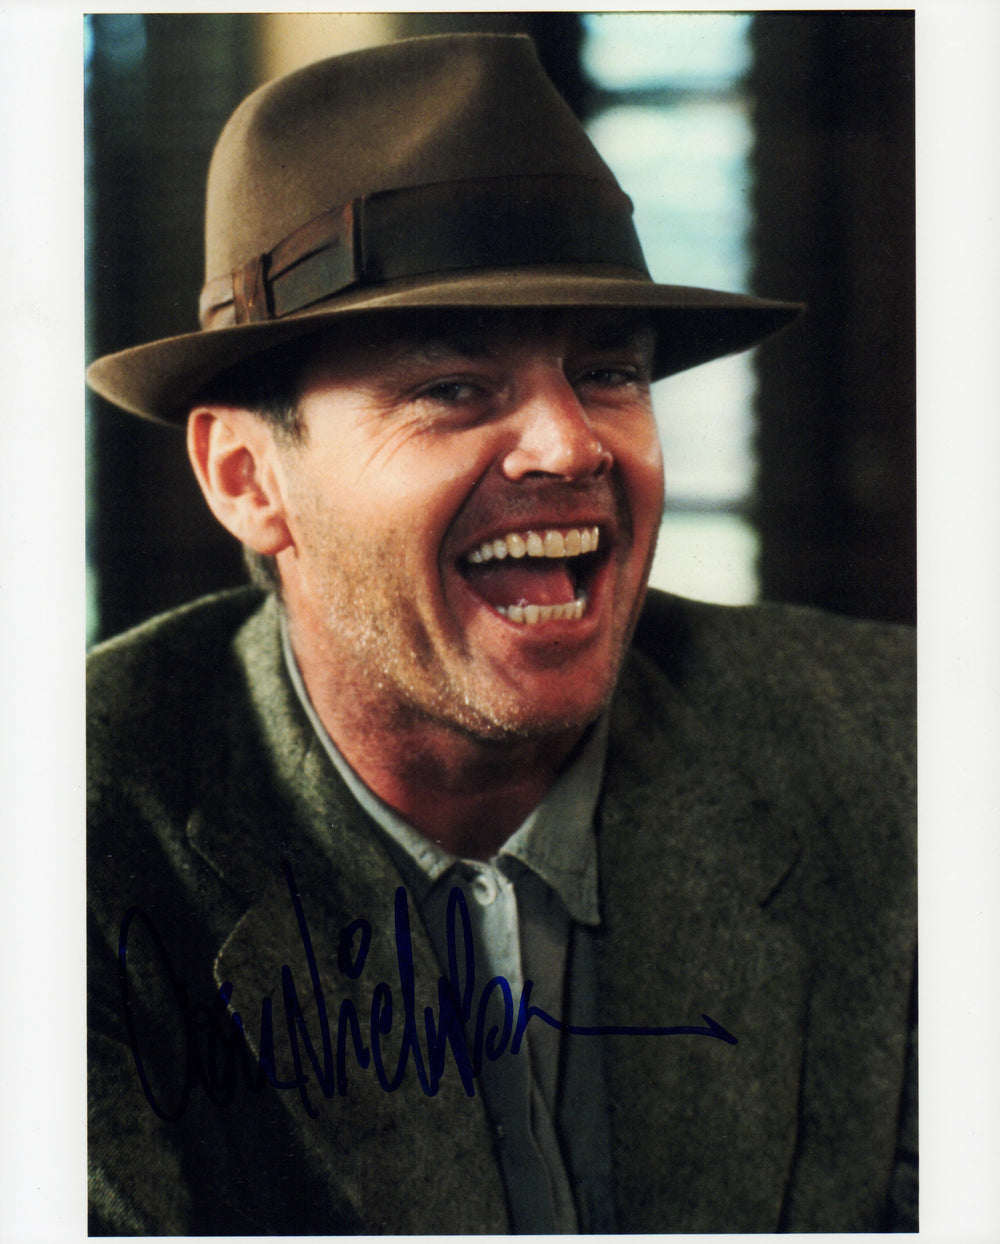 Jack Nicholson as Frank Chambers in The Postman Always Rings Twice - The Shining, Batman, Easy Rider, Chinatown, A Few Good Men - Signed 8x10 Photo